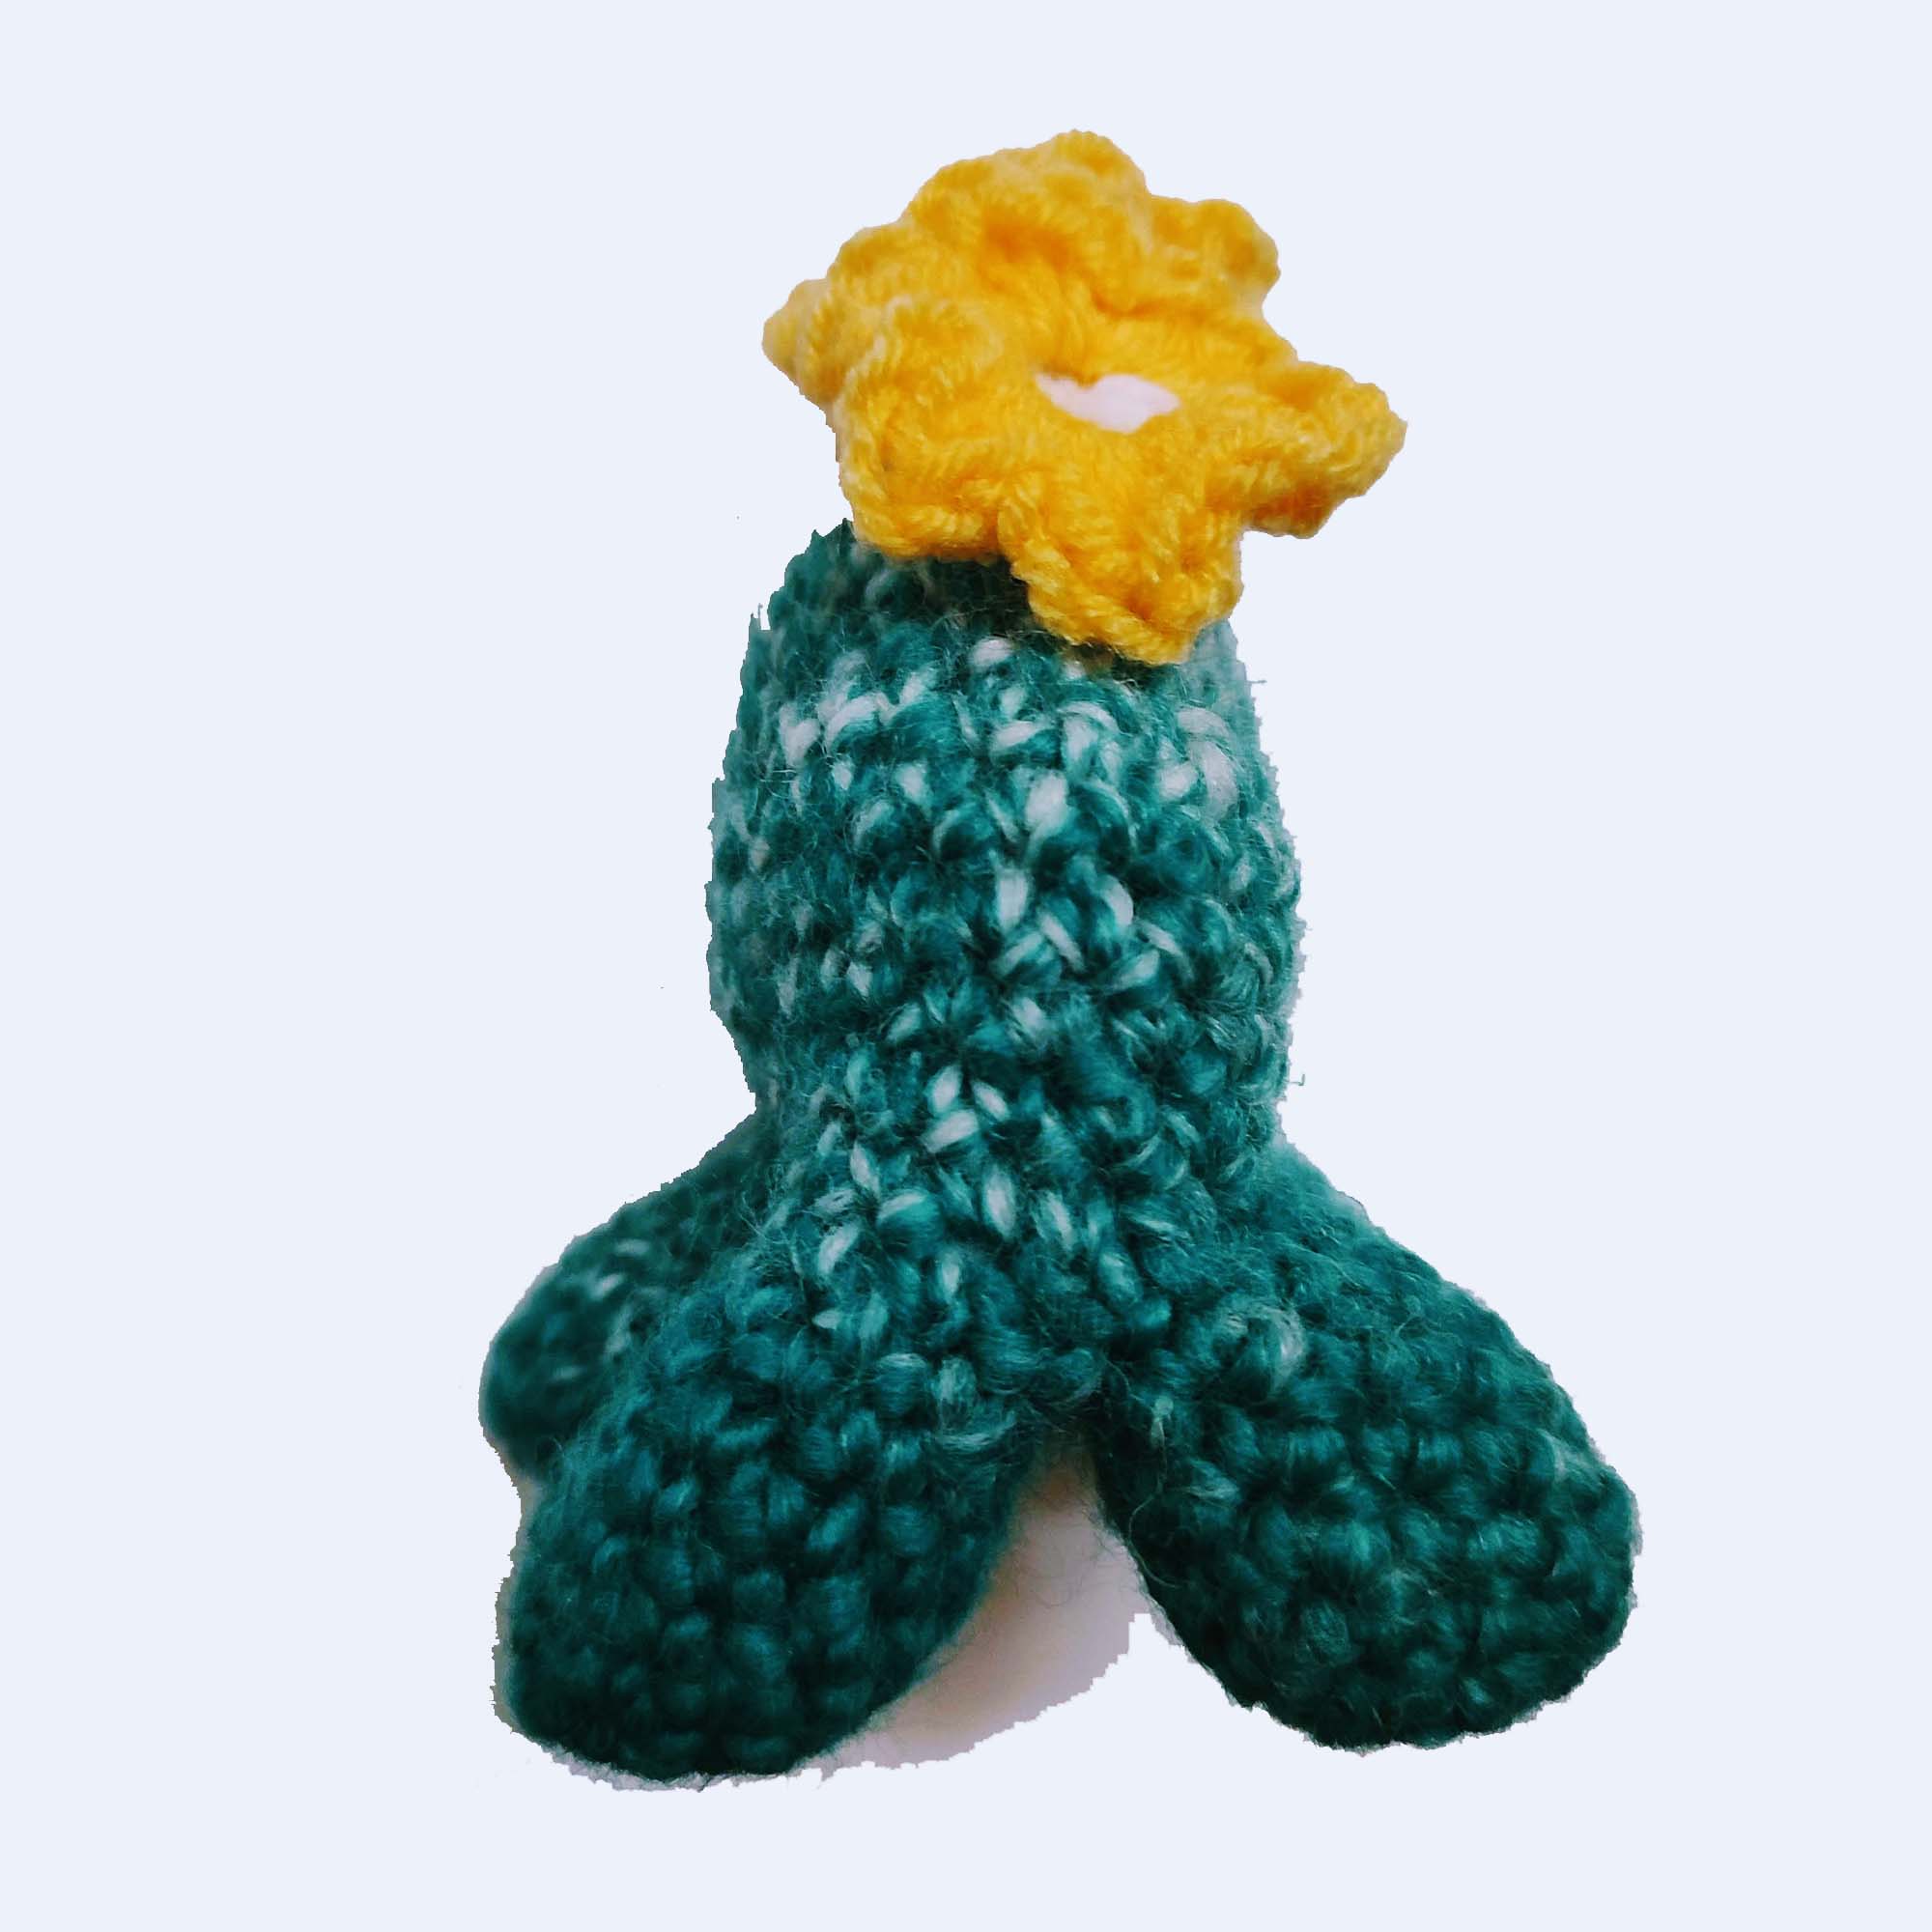 green crocheted nunion toy with four legs, a faceless head with yellow flowers sprouting from it